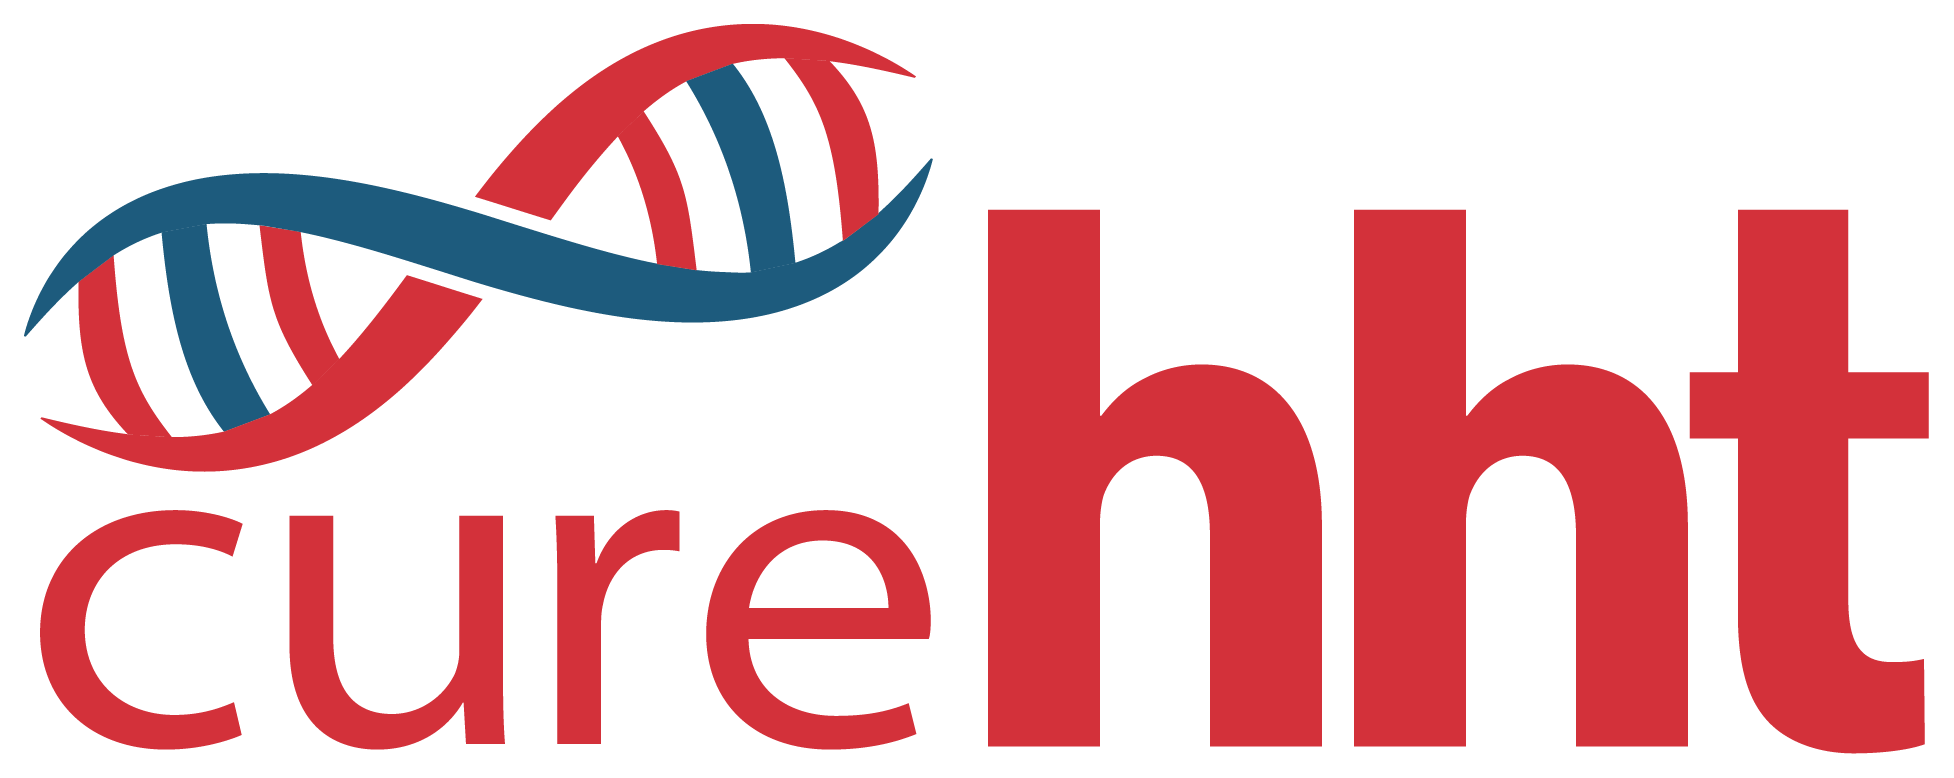 Curehht-logo.PNG